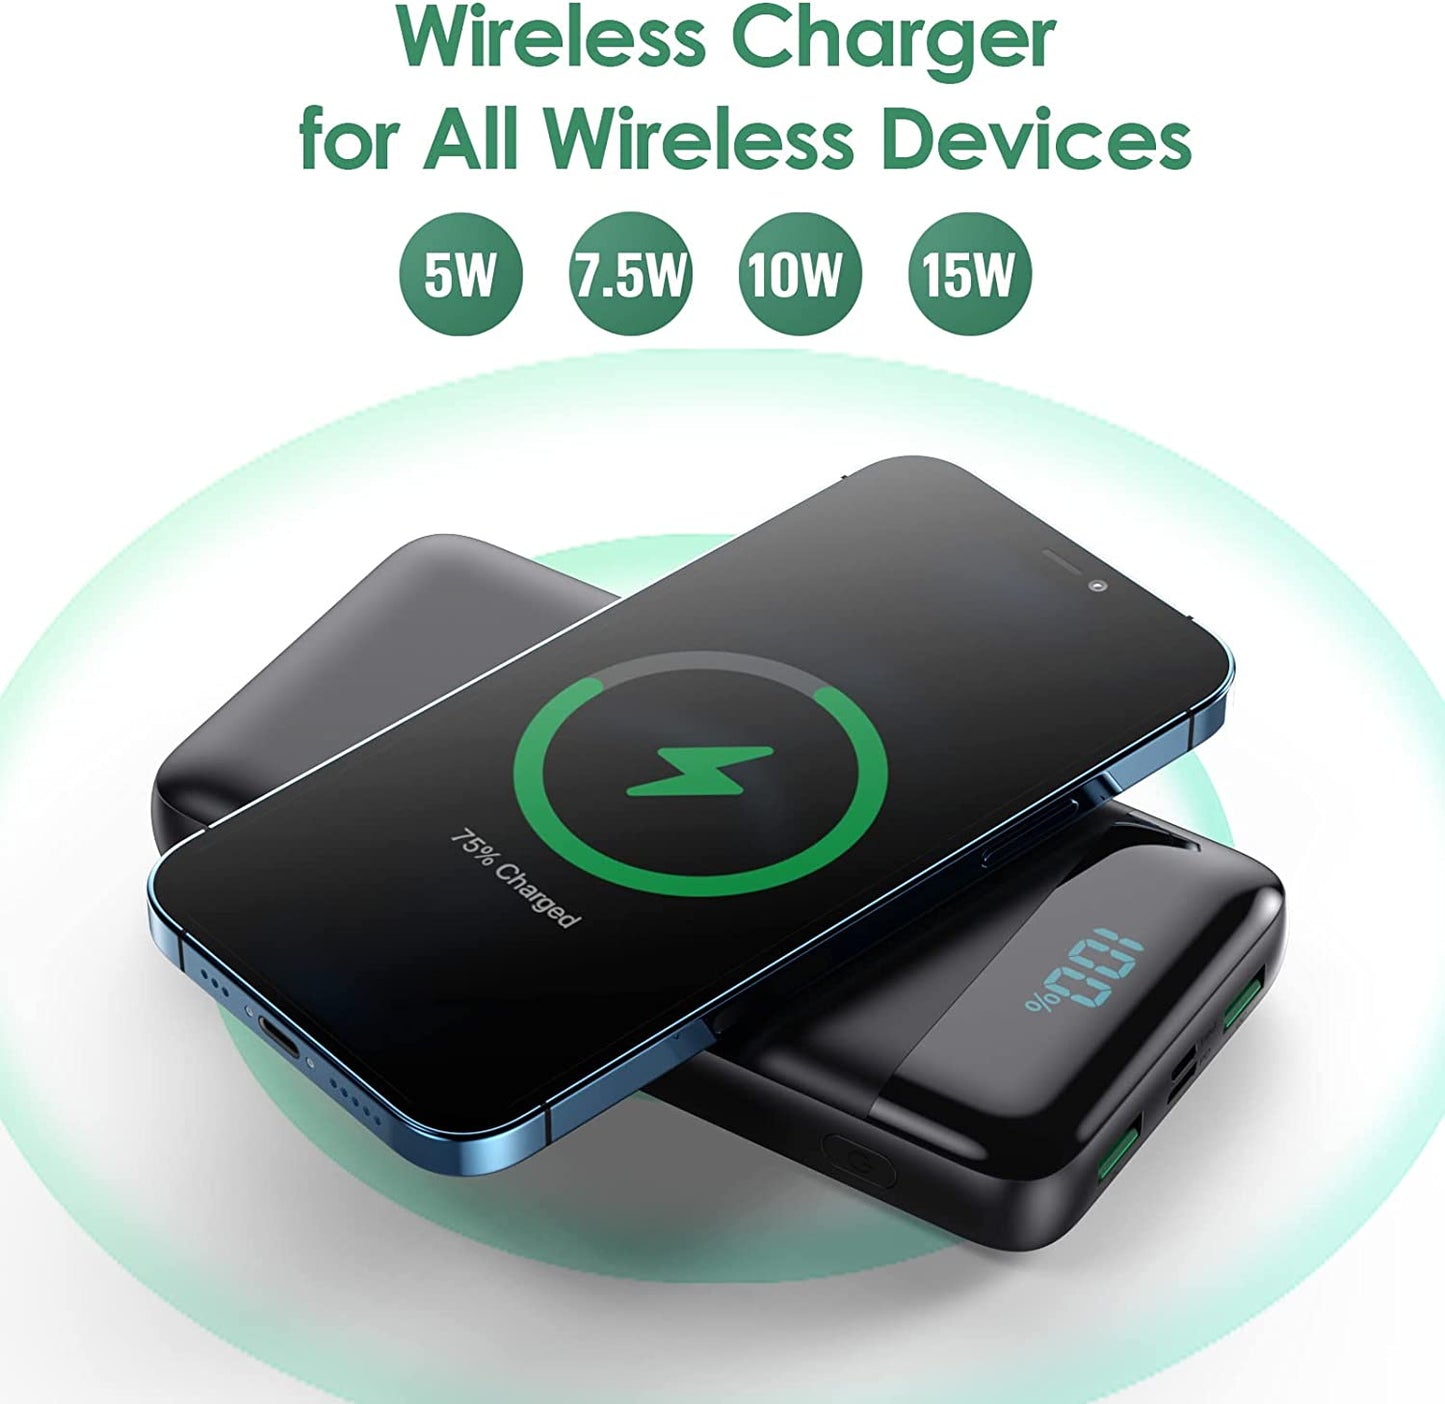 30,800mAh Wireless Portable Charger with 15W Wireless Charging, 25W PD QC4.0 Fast Charging, Smart LED Display, USB-C Power Bank, 4 Output & 2 Input for Smartphones